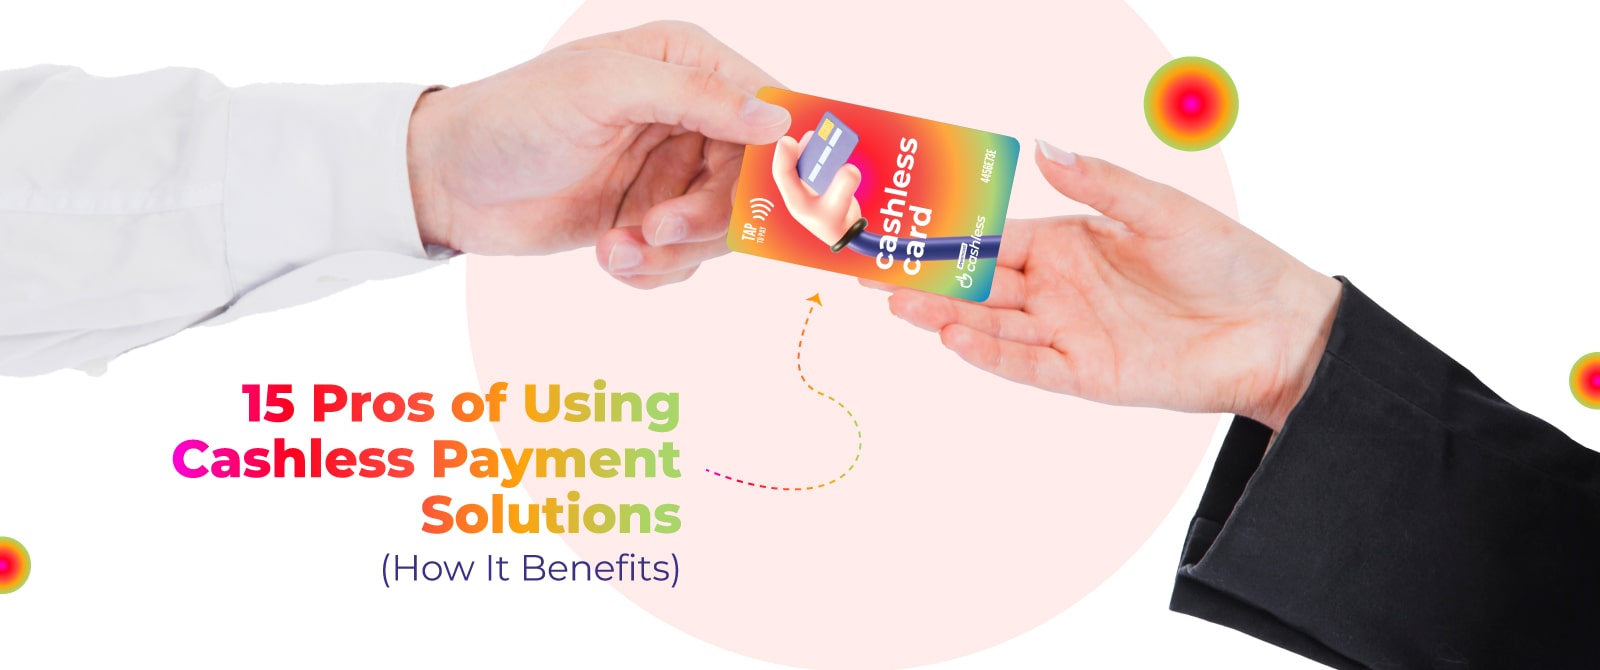 15 Pros of Using Cashless Payment Solutions (How It Benefits)